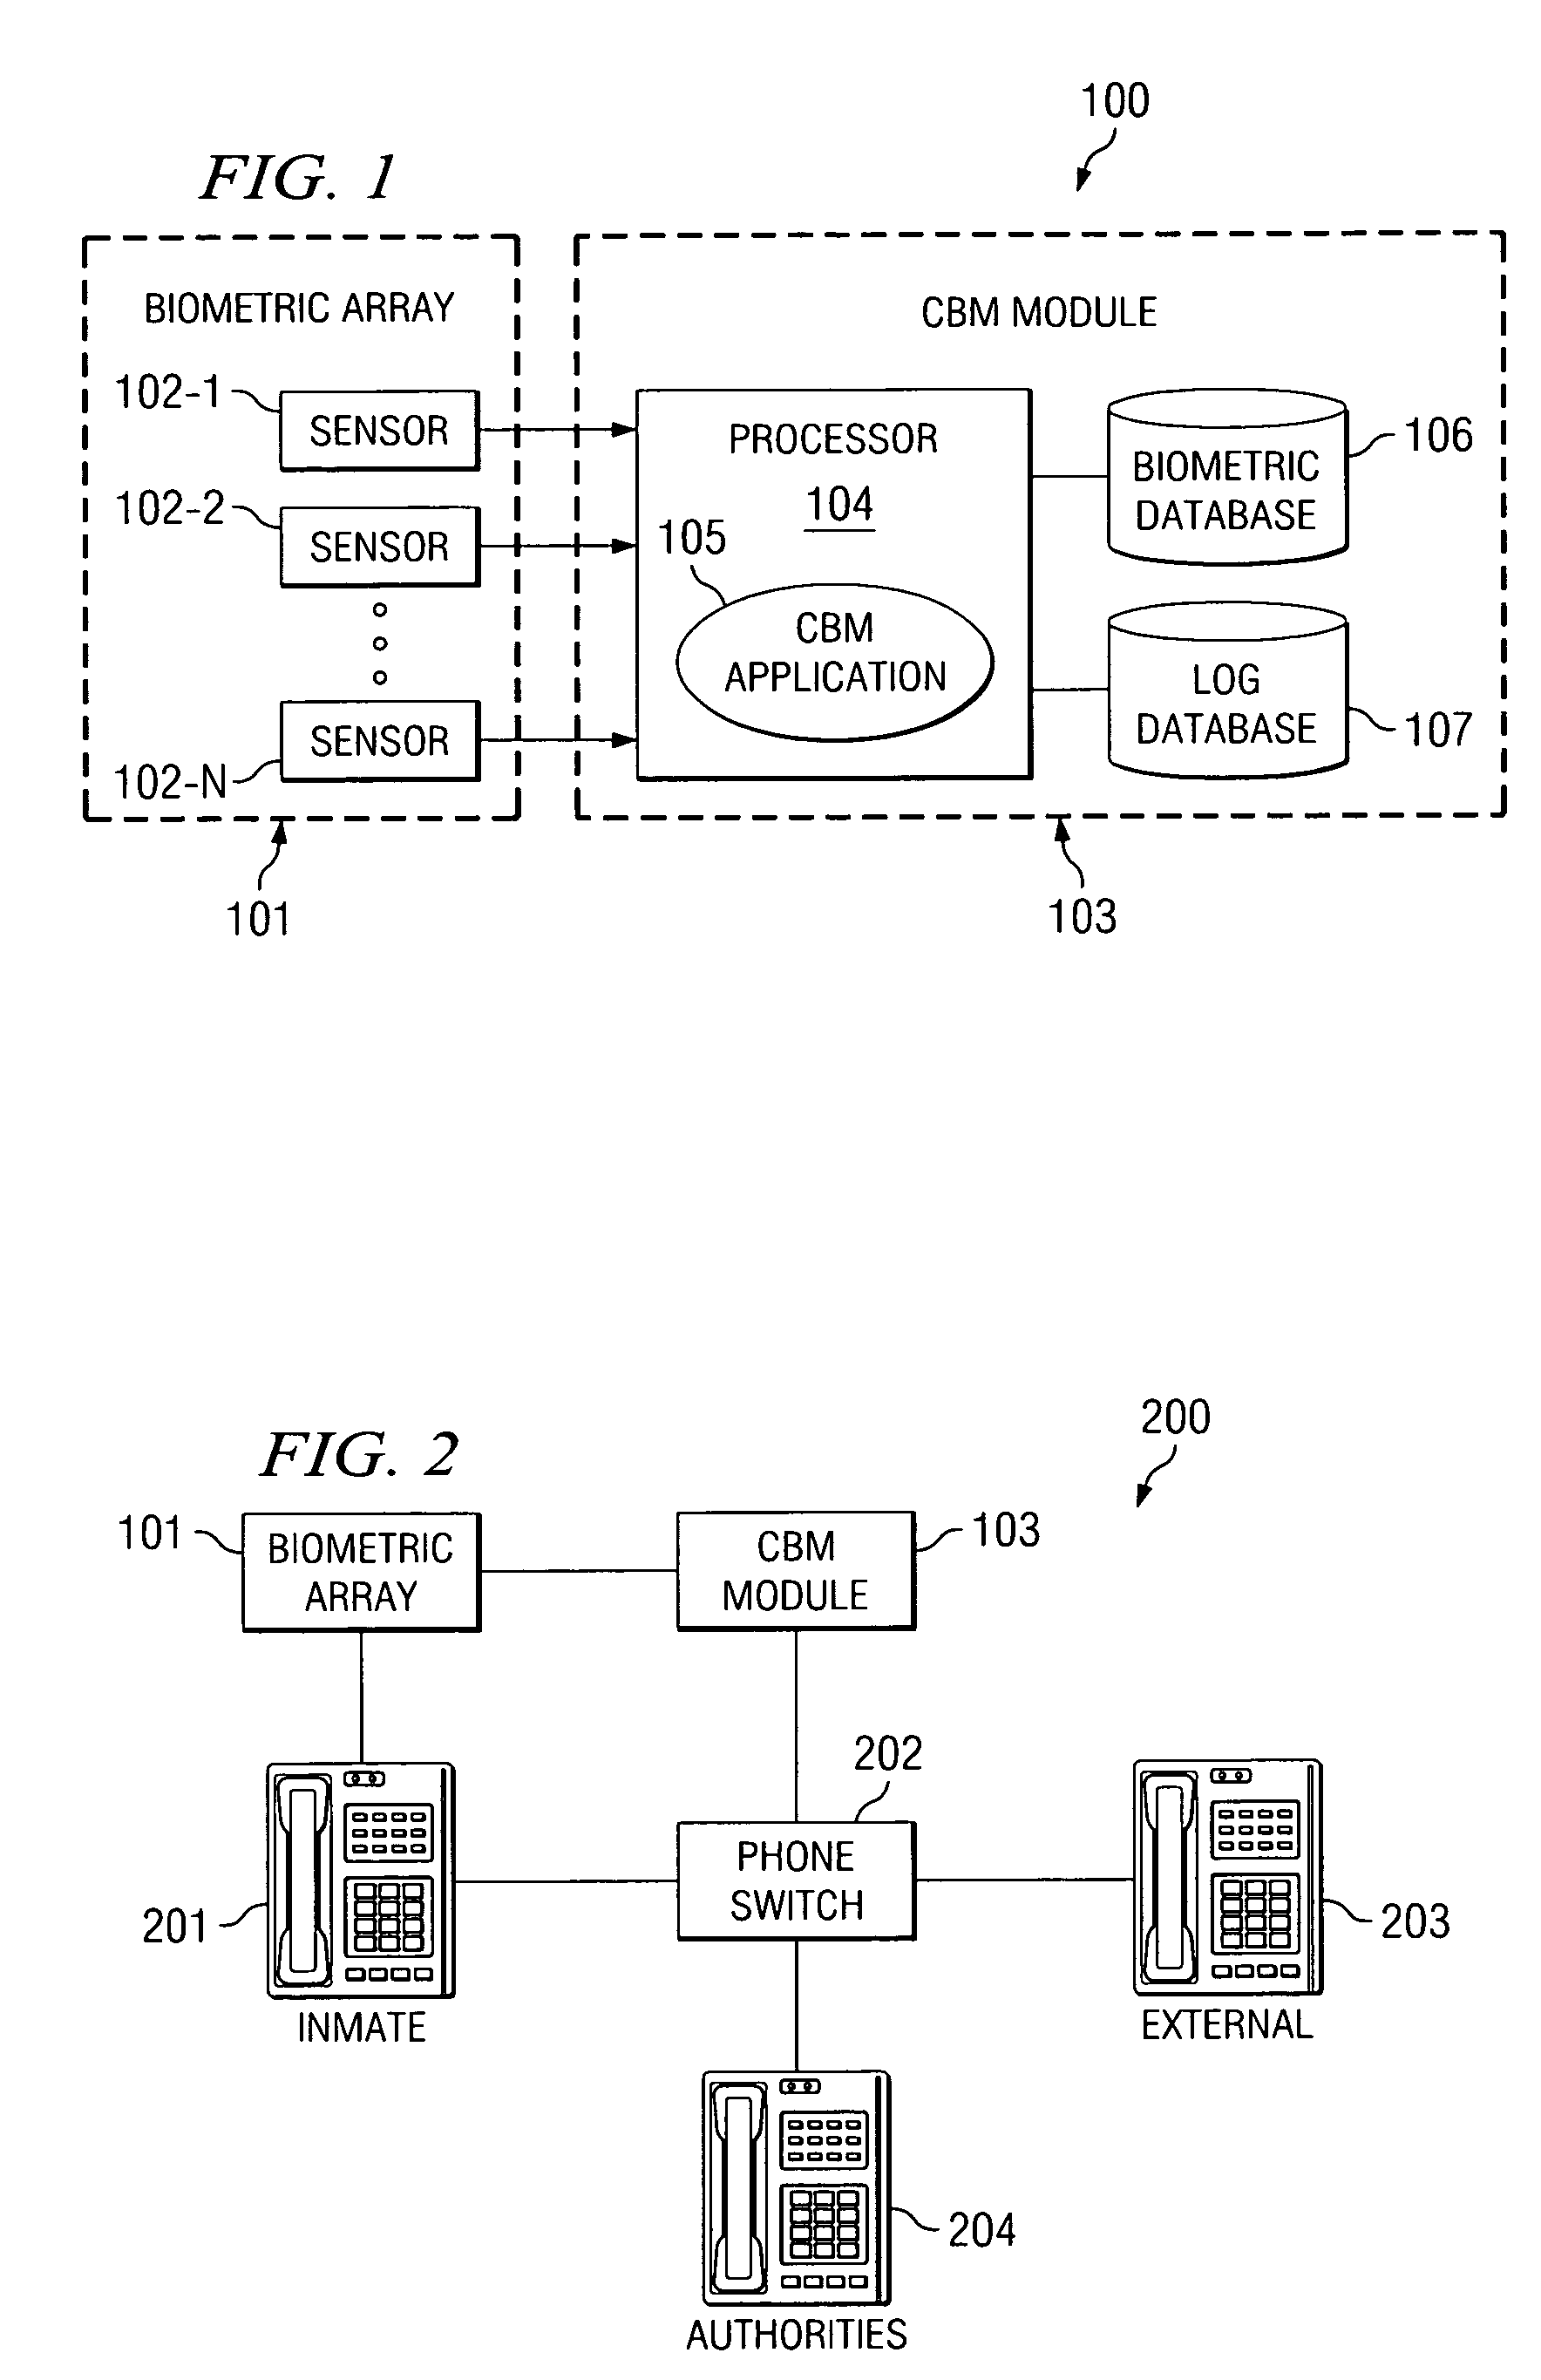 Systems and methods for identity verification using continuous biometric monitoring